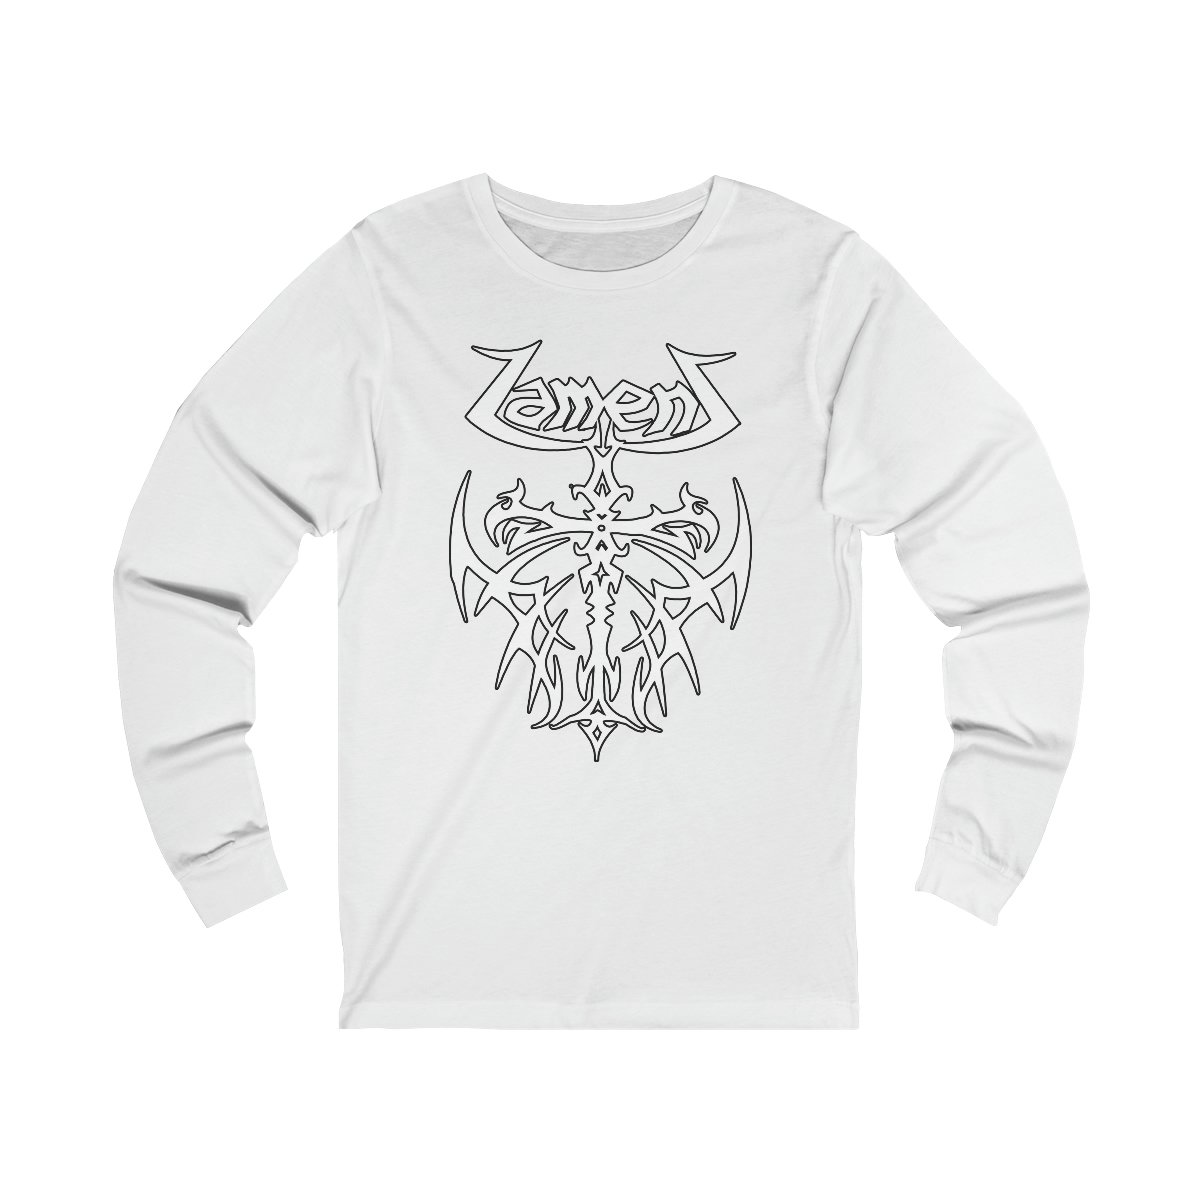 Lament Tribal Outlined Long Sleeve Tshirt 3501